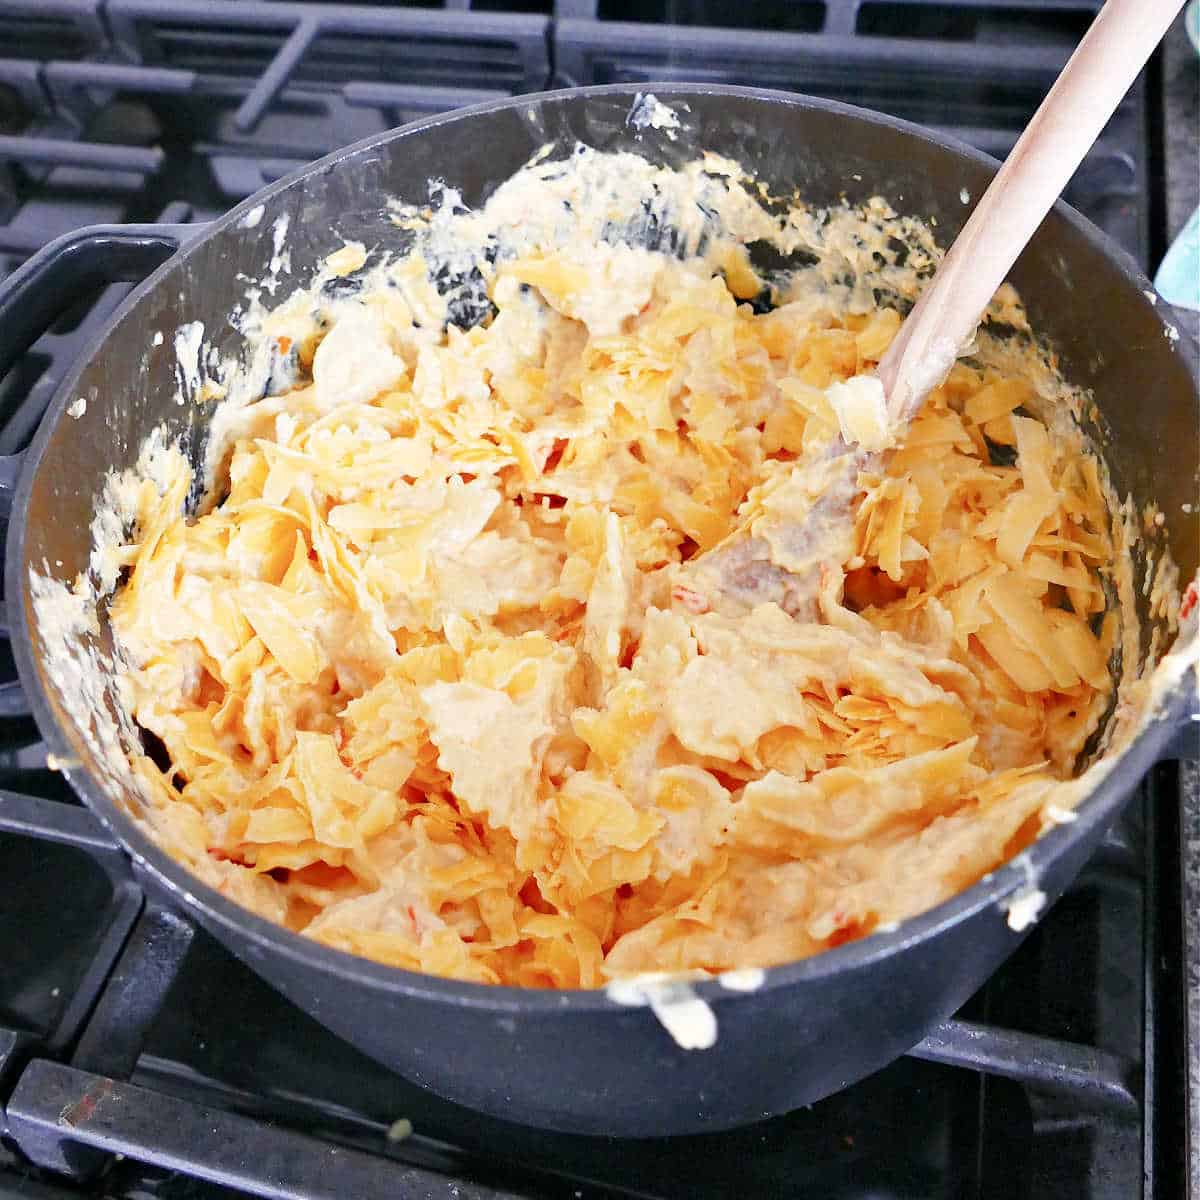 shredded cheddar cheese being folded into pasta in a pot